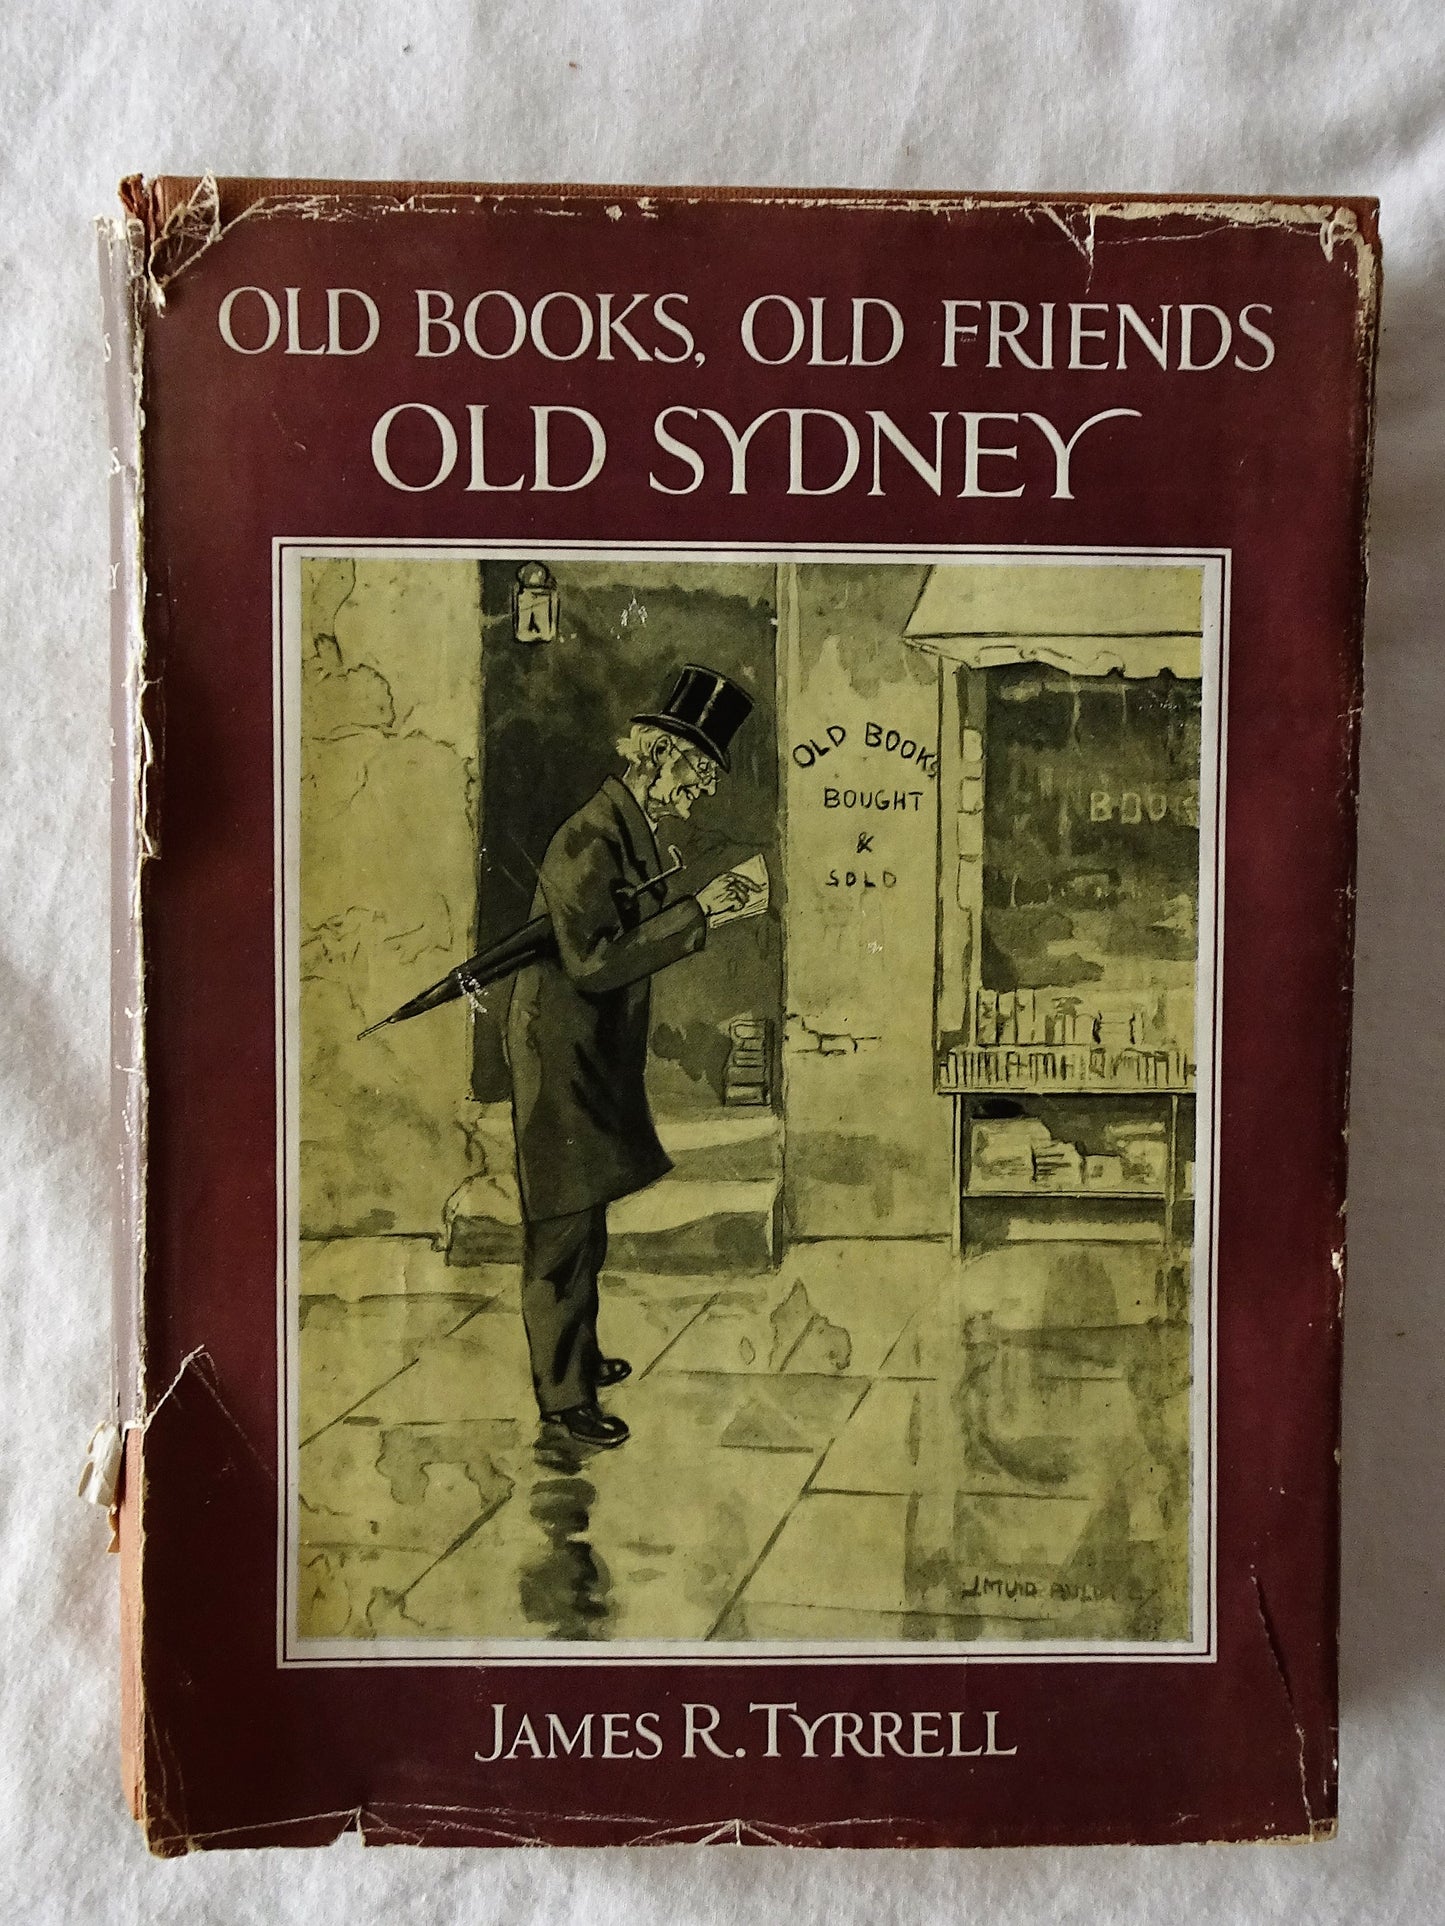 Old Books, Old Friends, Old Sydney  by James R. Tyrrell